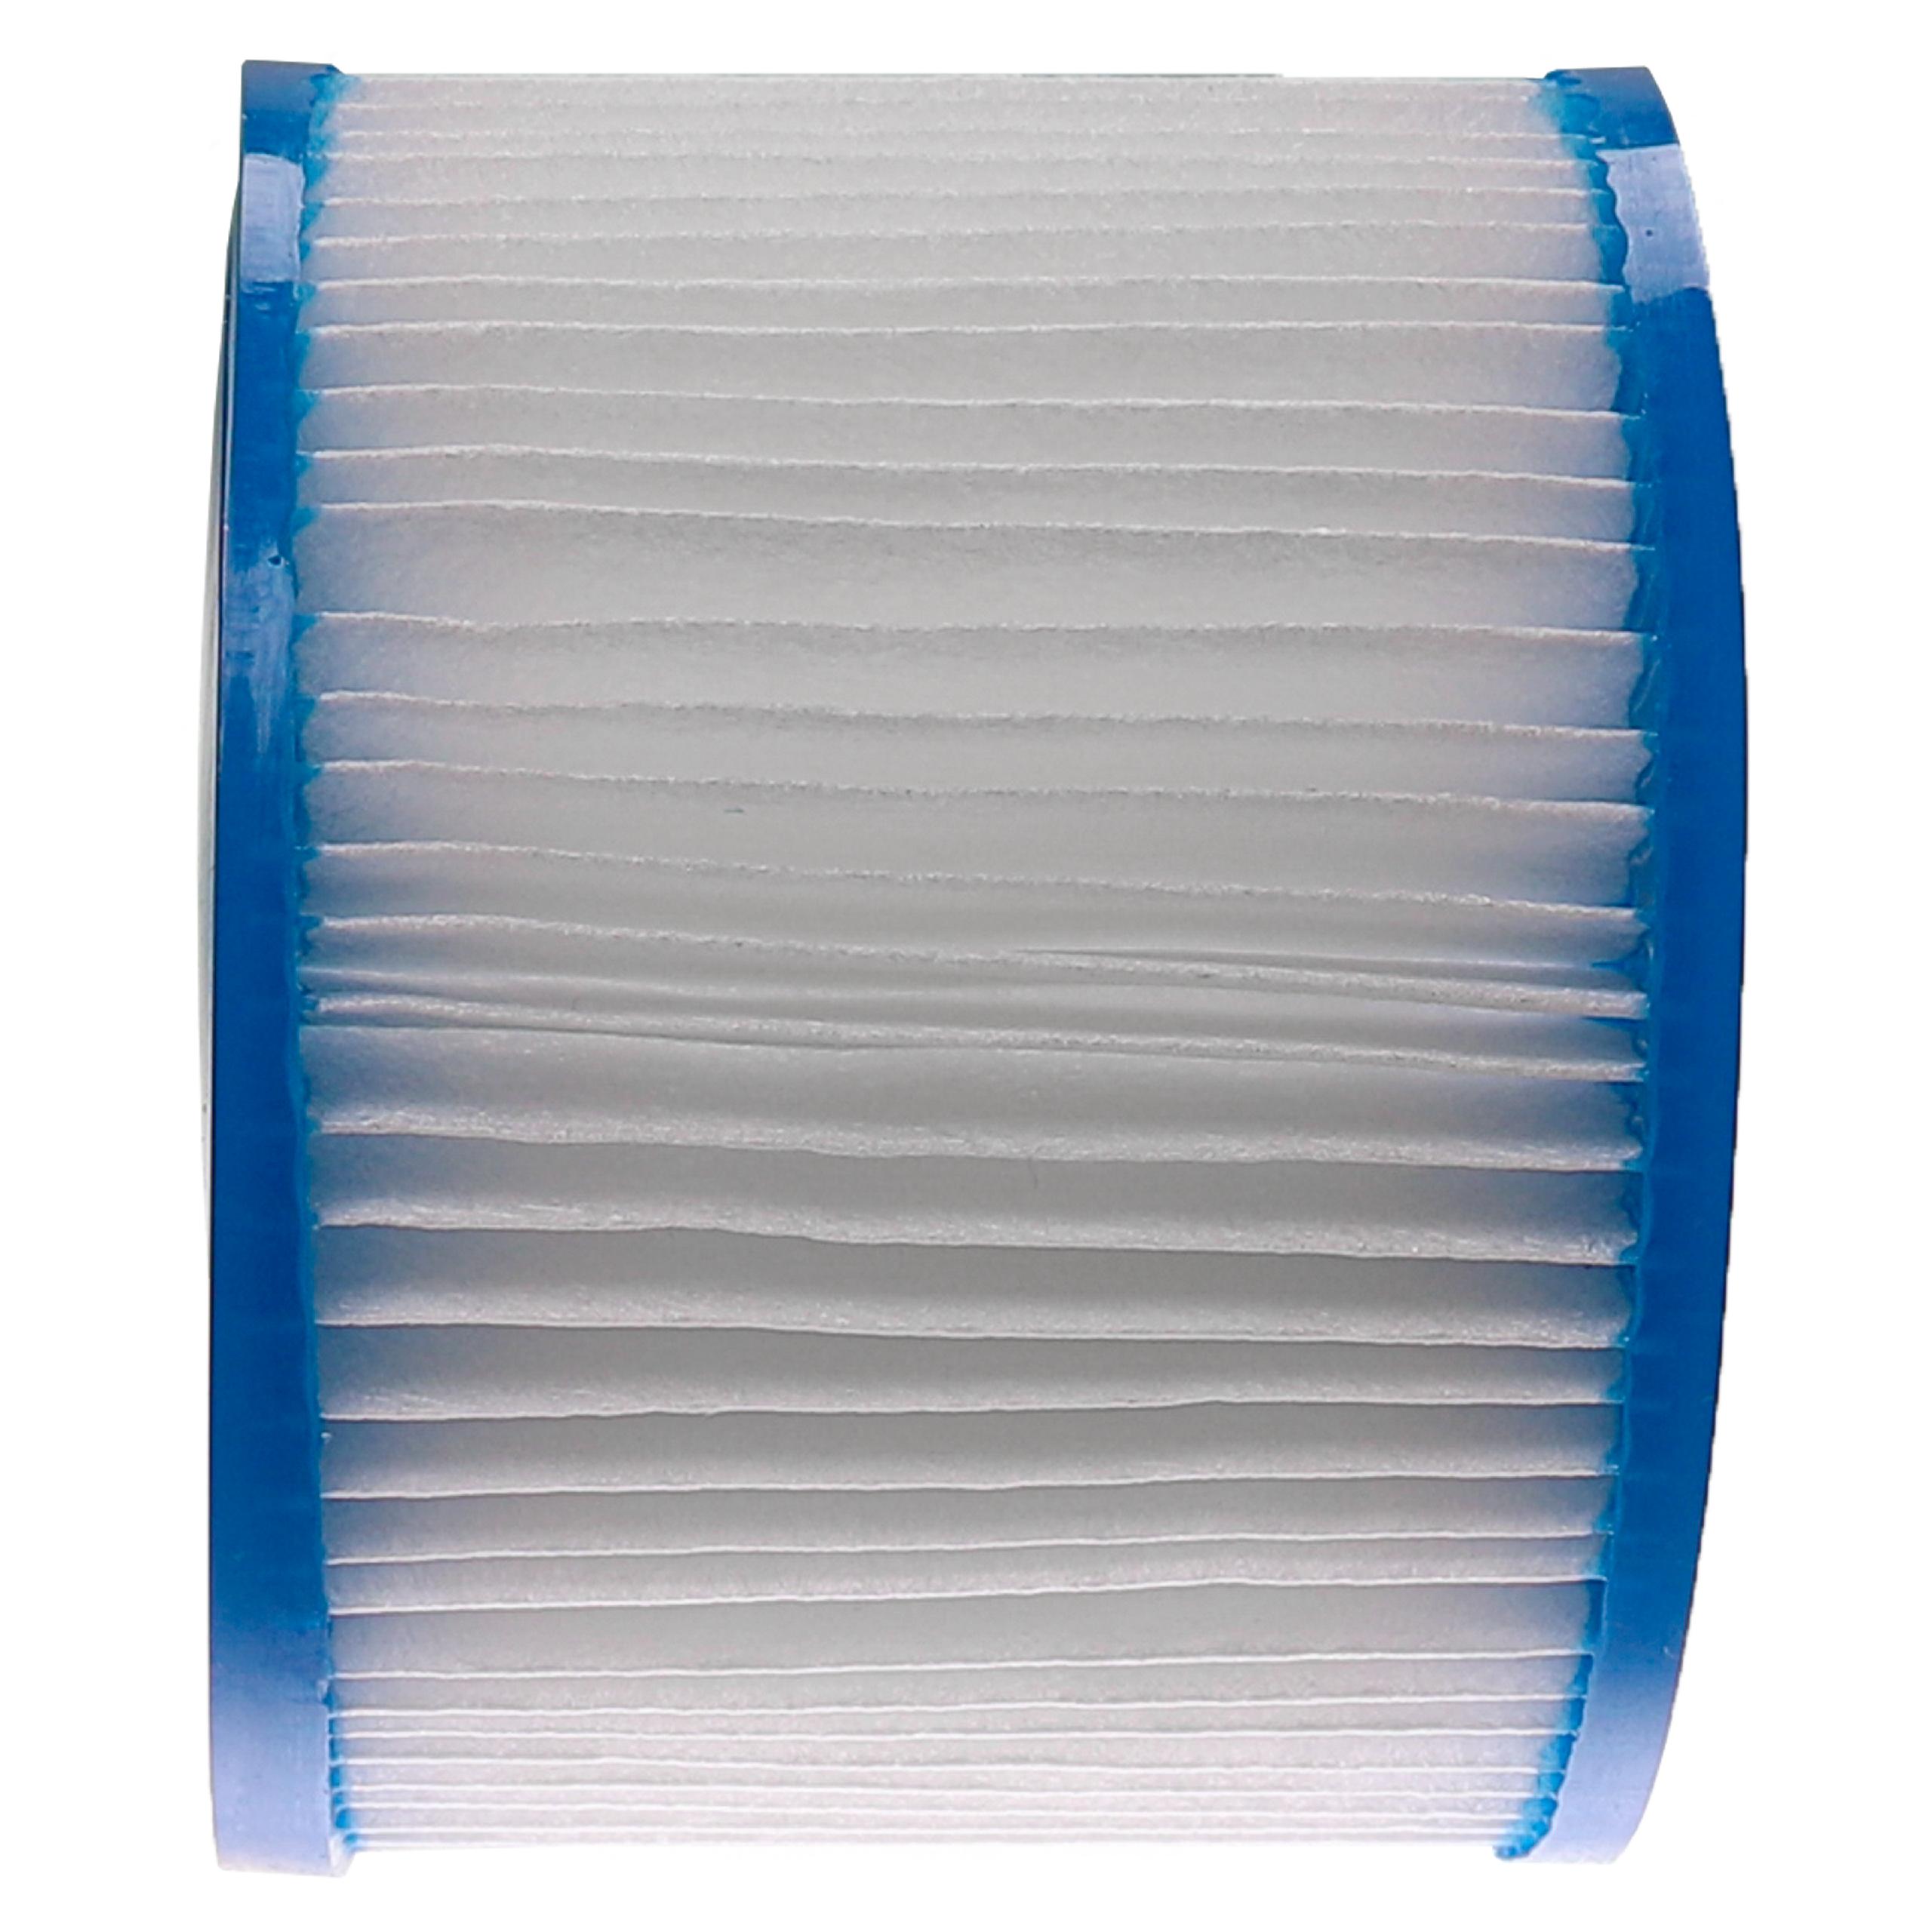 Pool Filter Type VI as Replacement for Bestway Typ VI, FD2134 - Filter Cartridge